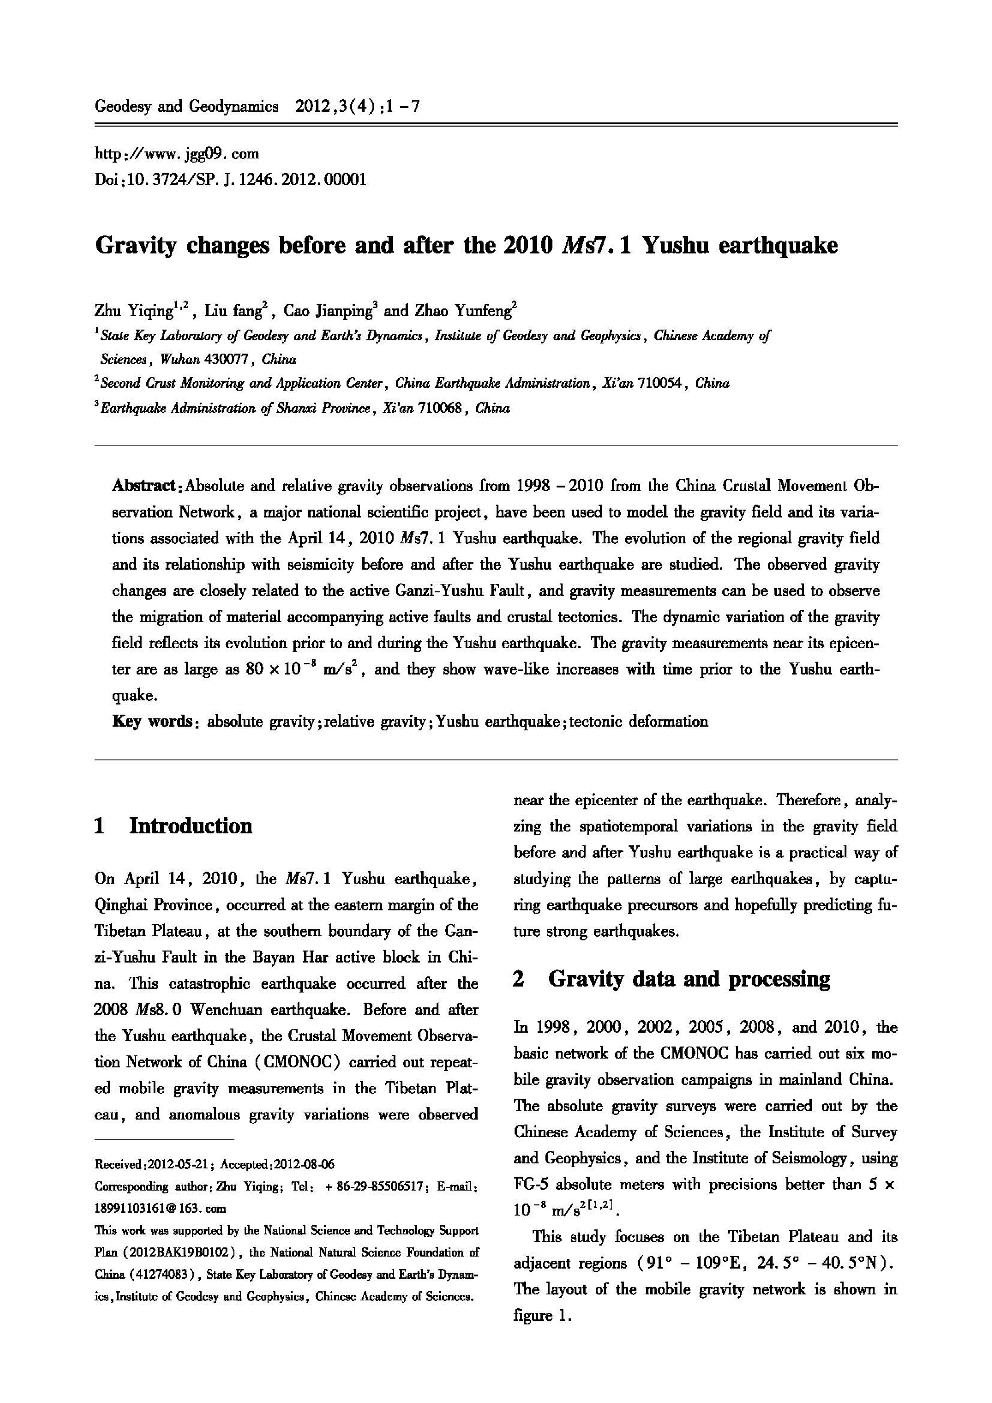 Gravity changes before and after the 2010 Ms7.1 Yushu earthquake 